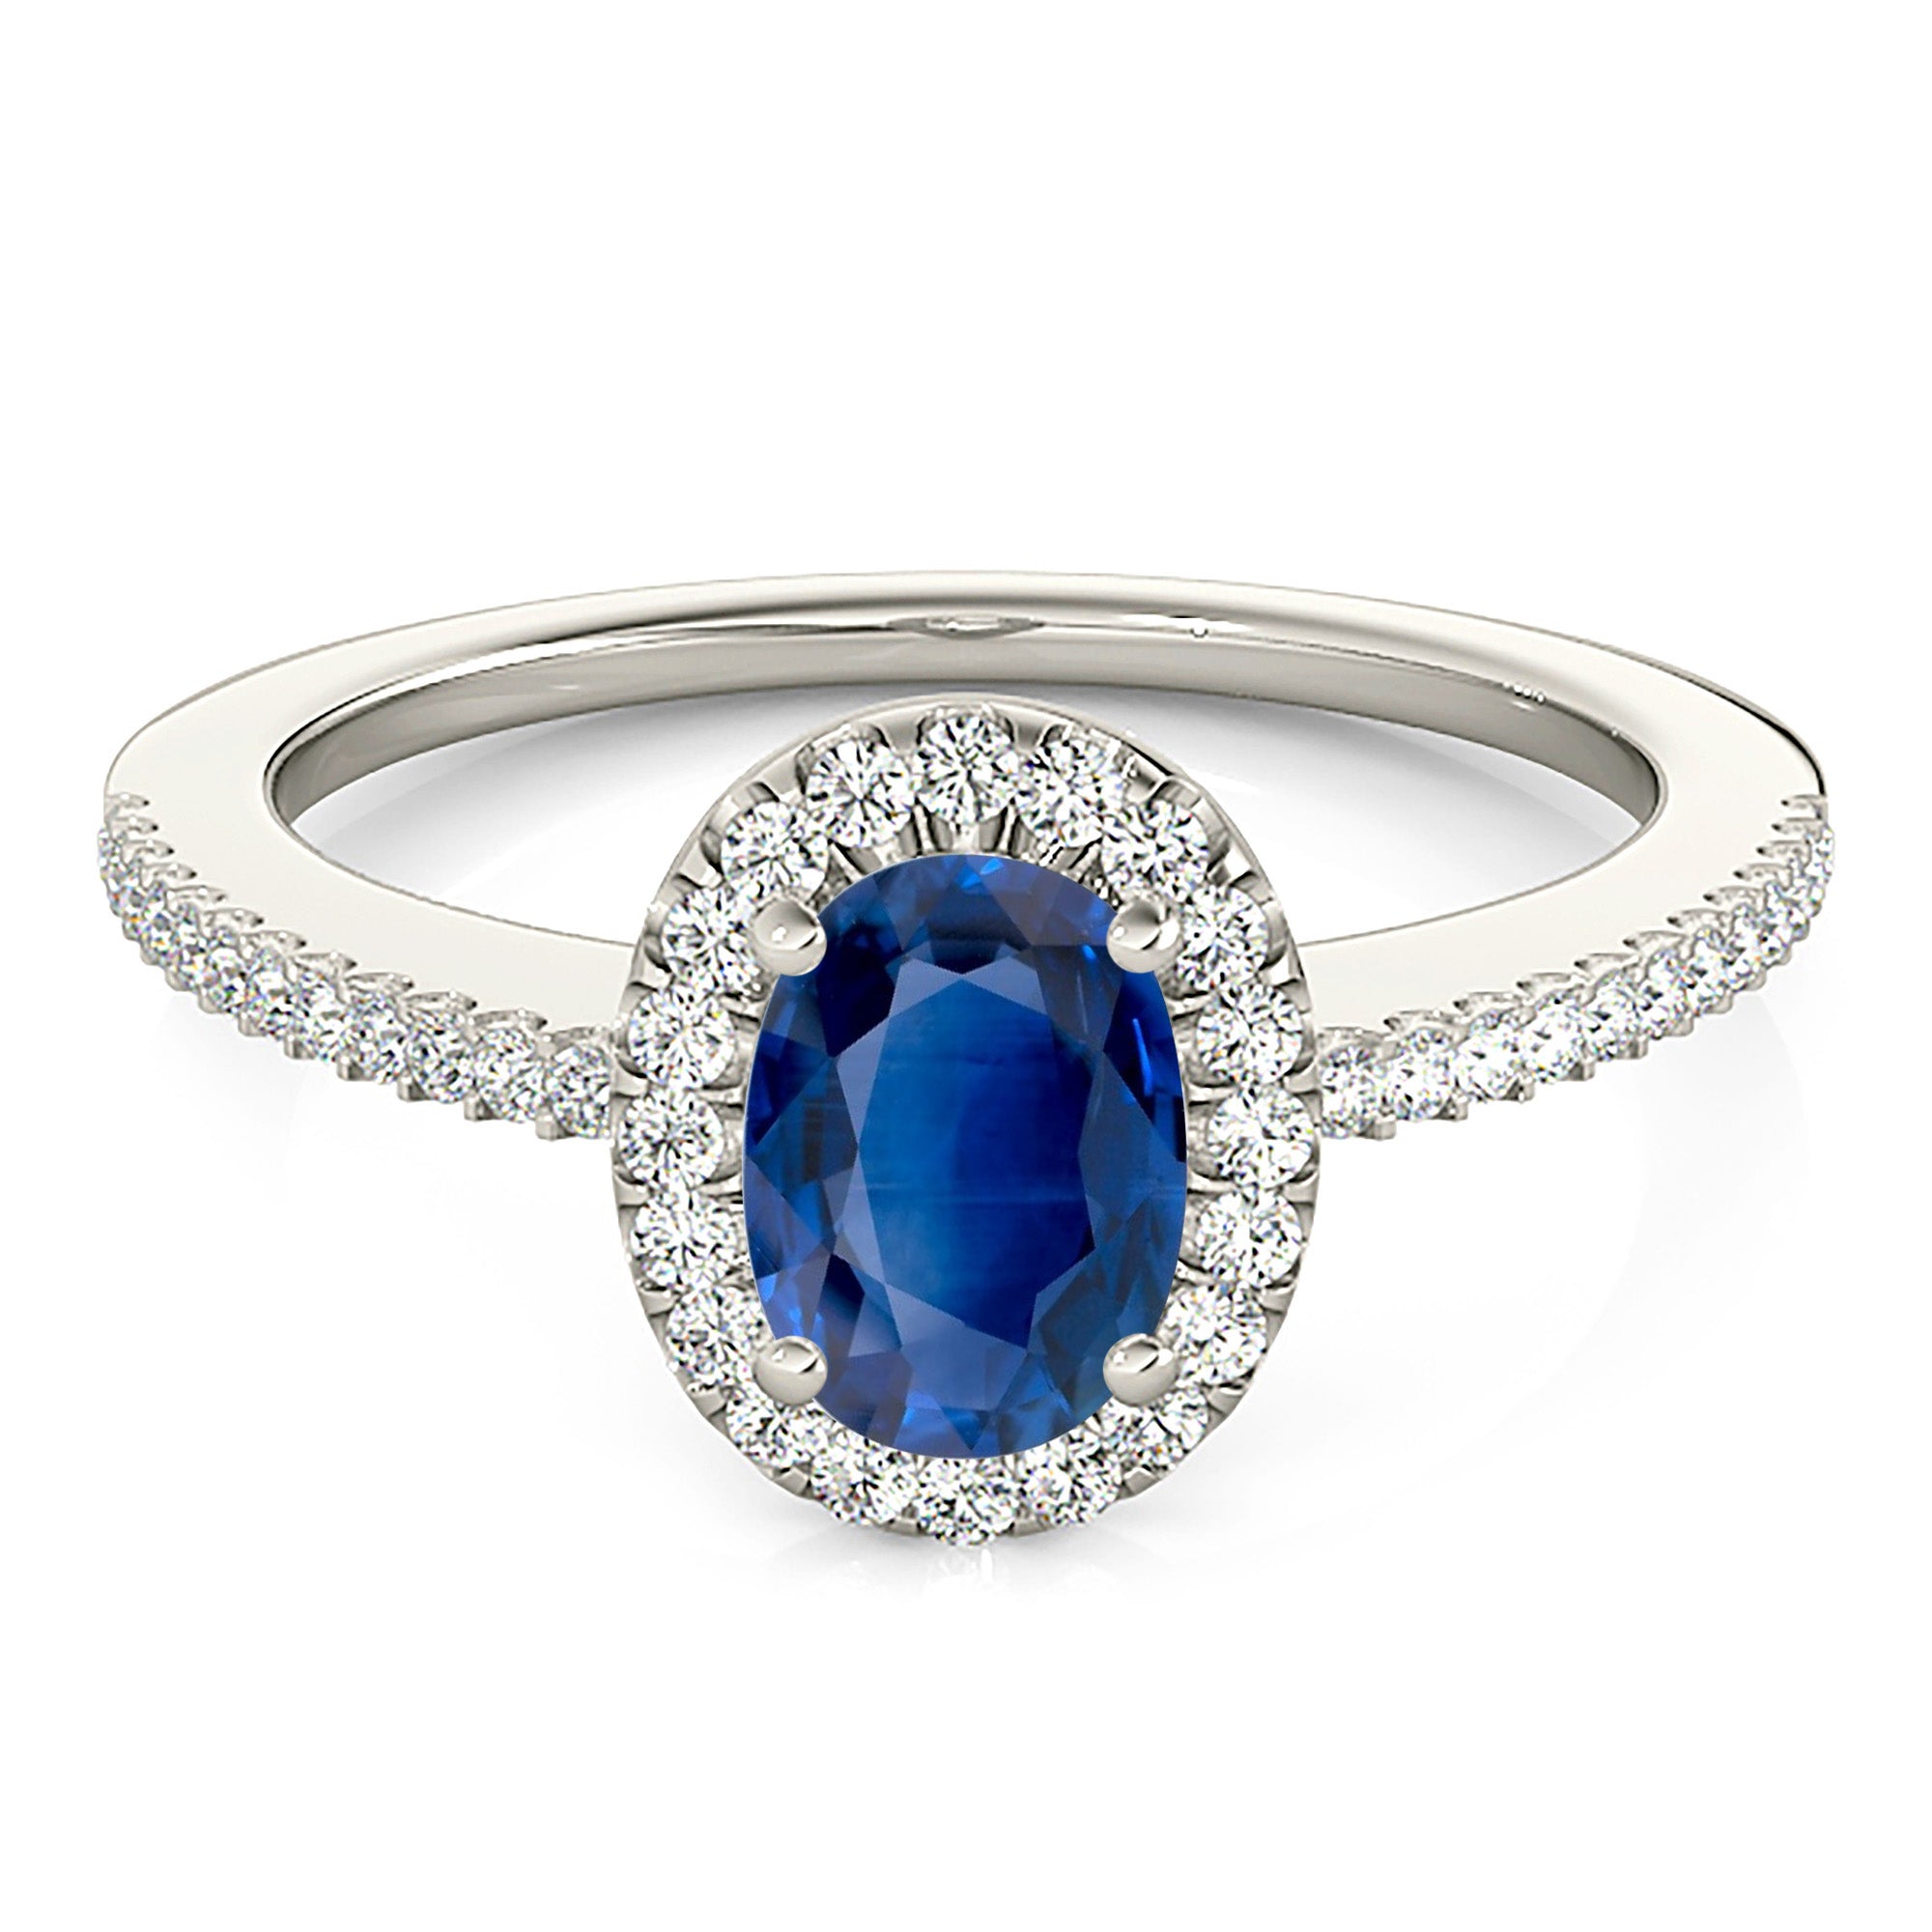 1.00 ct. Genuine Blue Oval Sapphire Ring With 0.20 ctw. Diamond Halo, Thin Diamond Band, Open Gallery | Natural Sapphire And Diamond Ring-in 14K/18K White, Yellow, Rose Gold and Platinum - Christmas Jewelry Gift -VIRABYANI